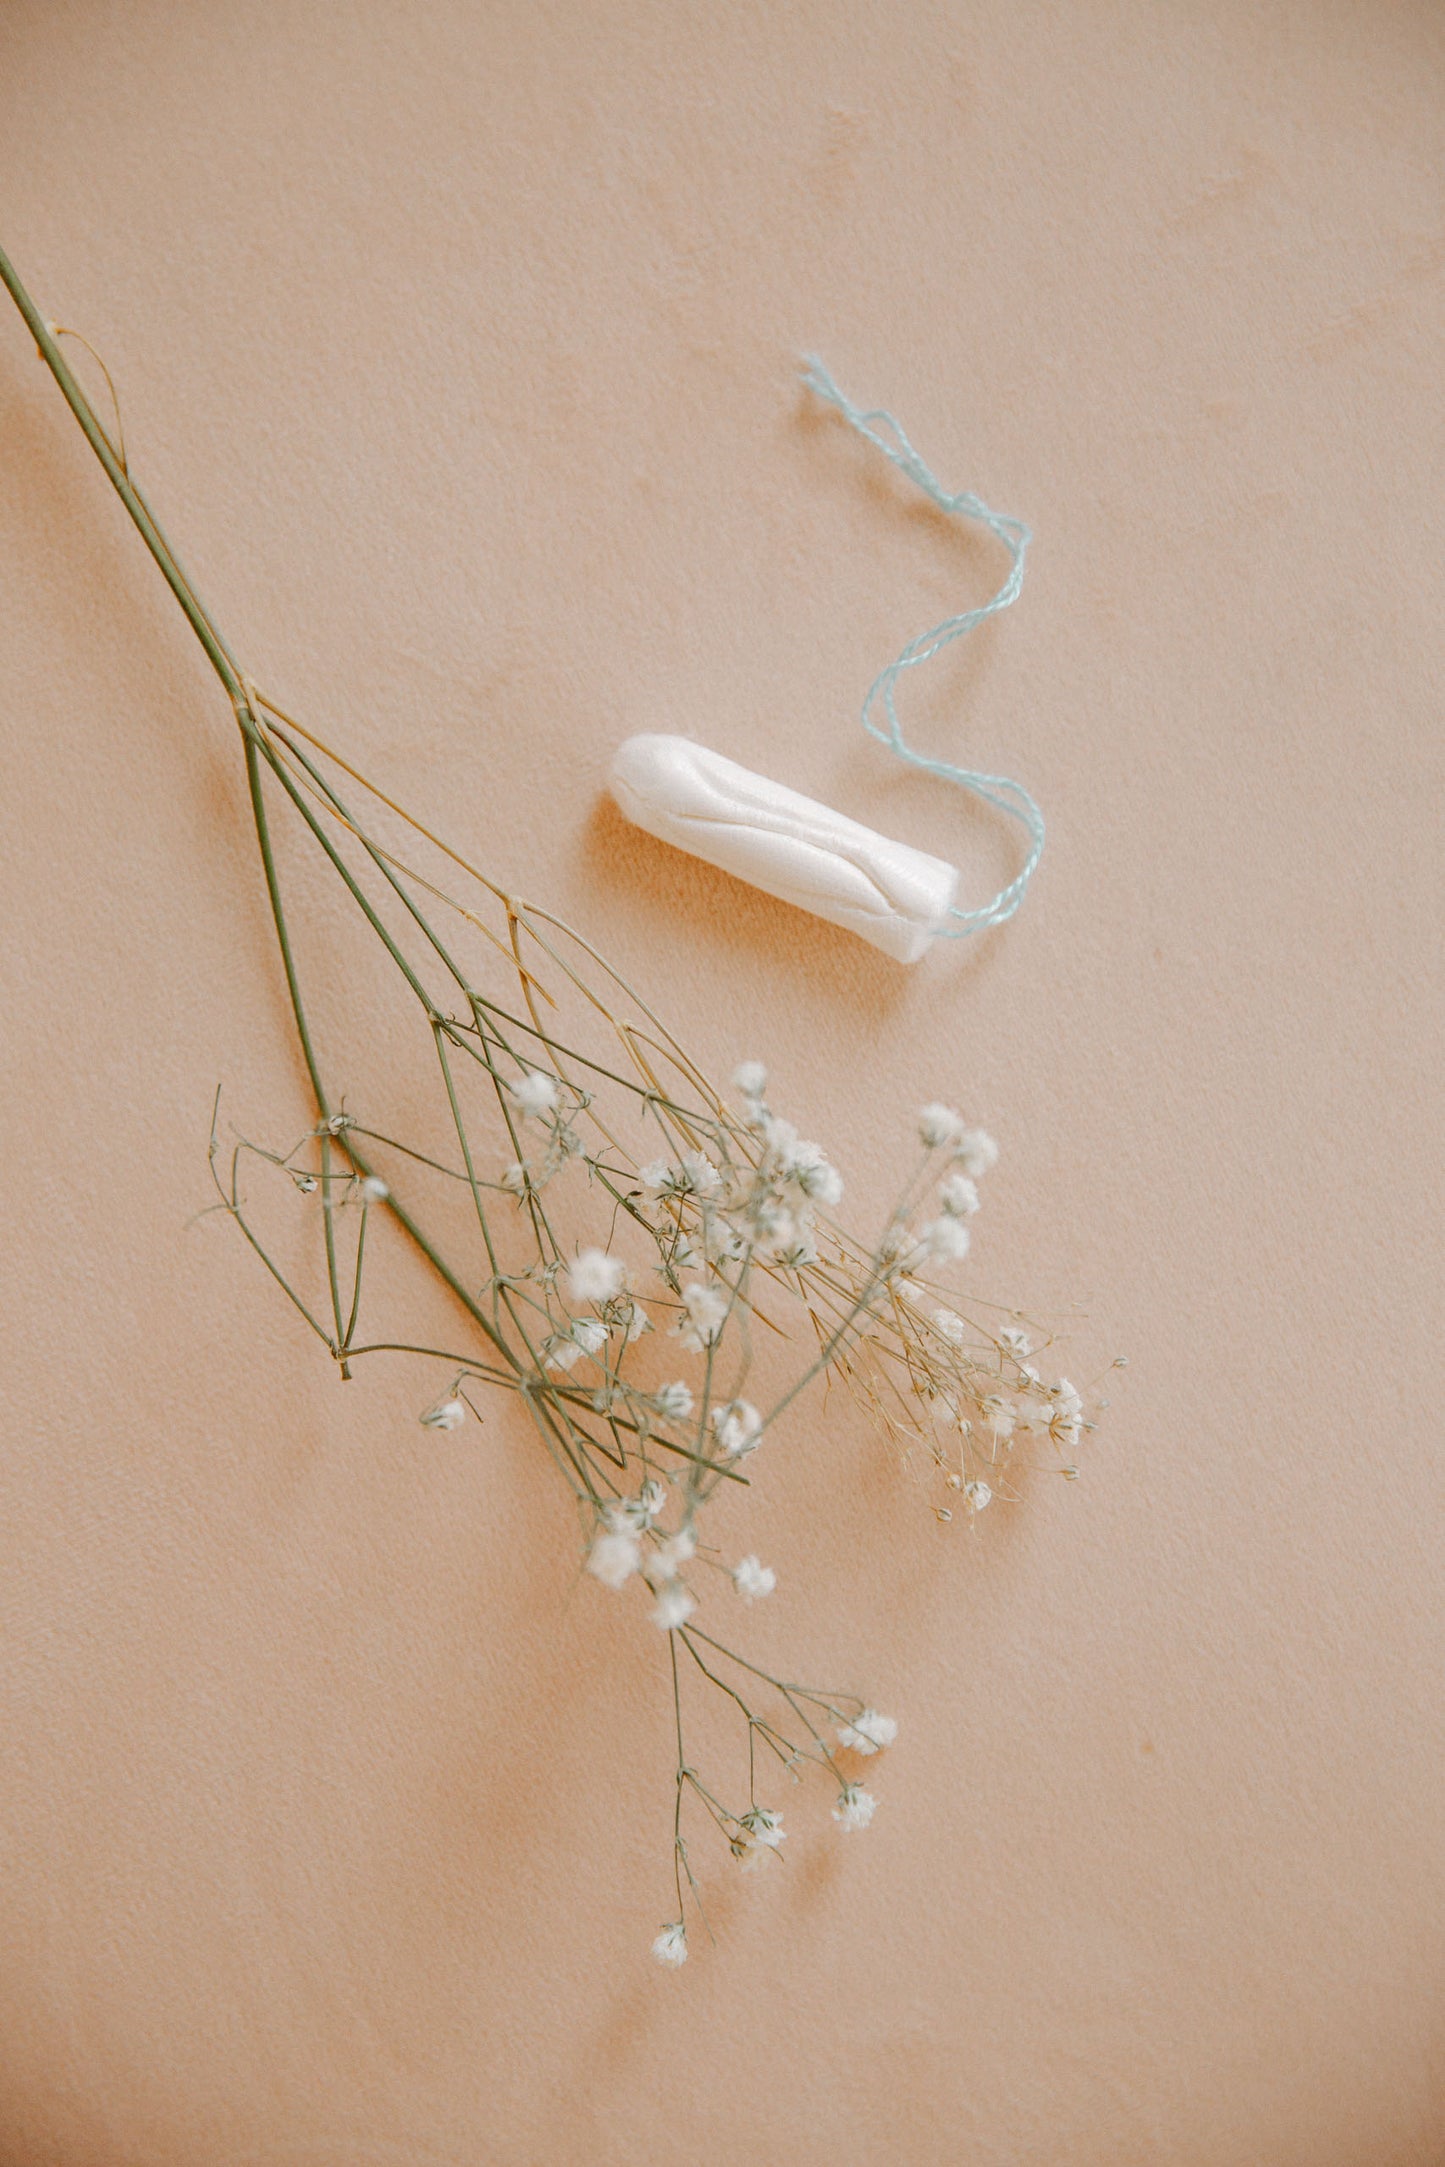 The first <span>compostable</span> tampon